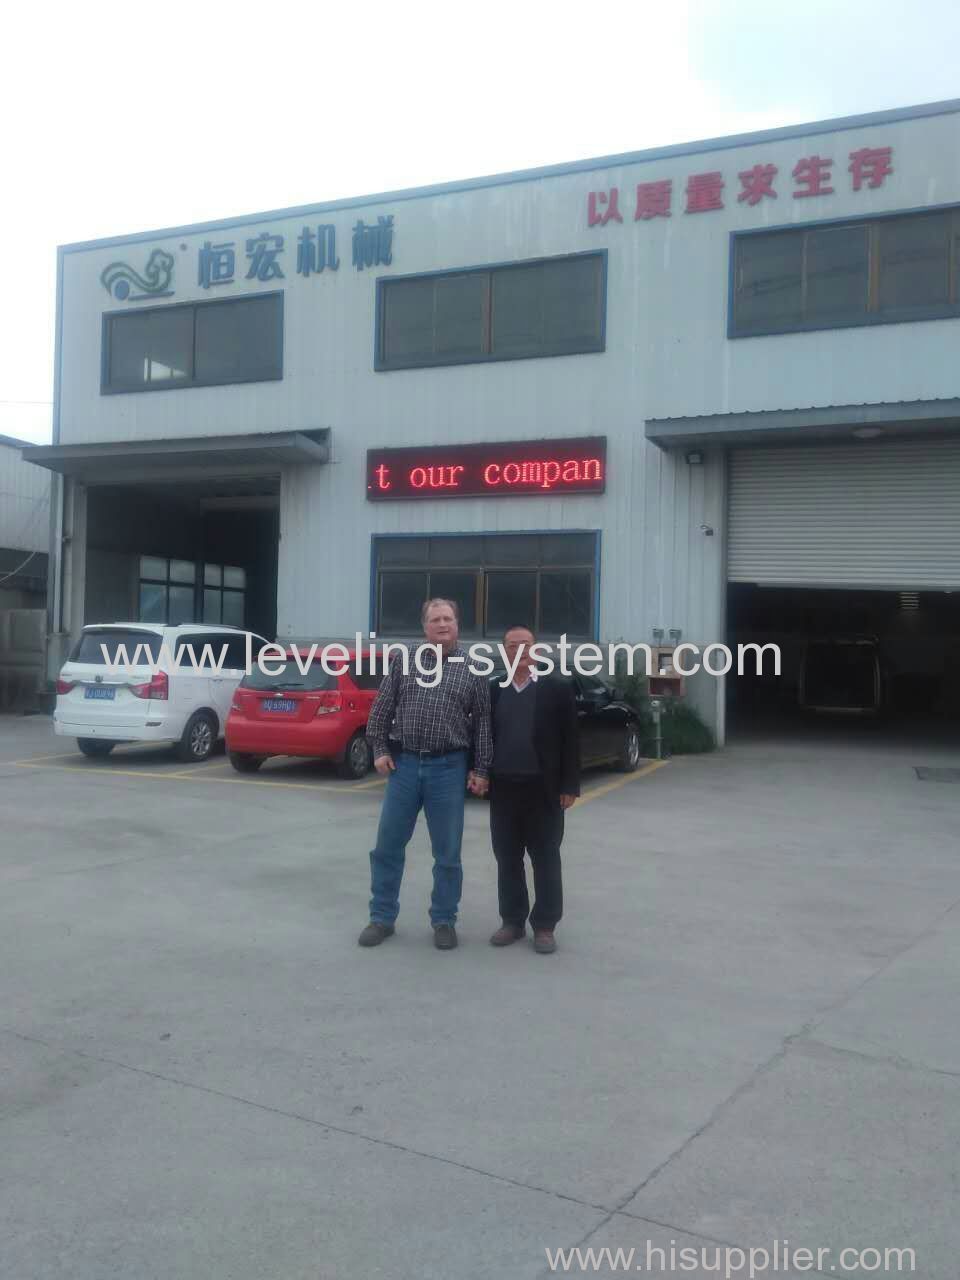 Welcome Keystone visit our company